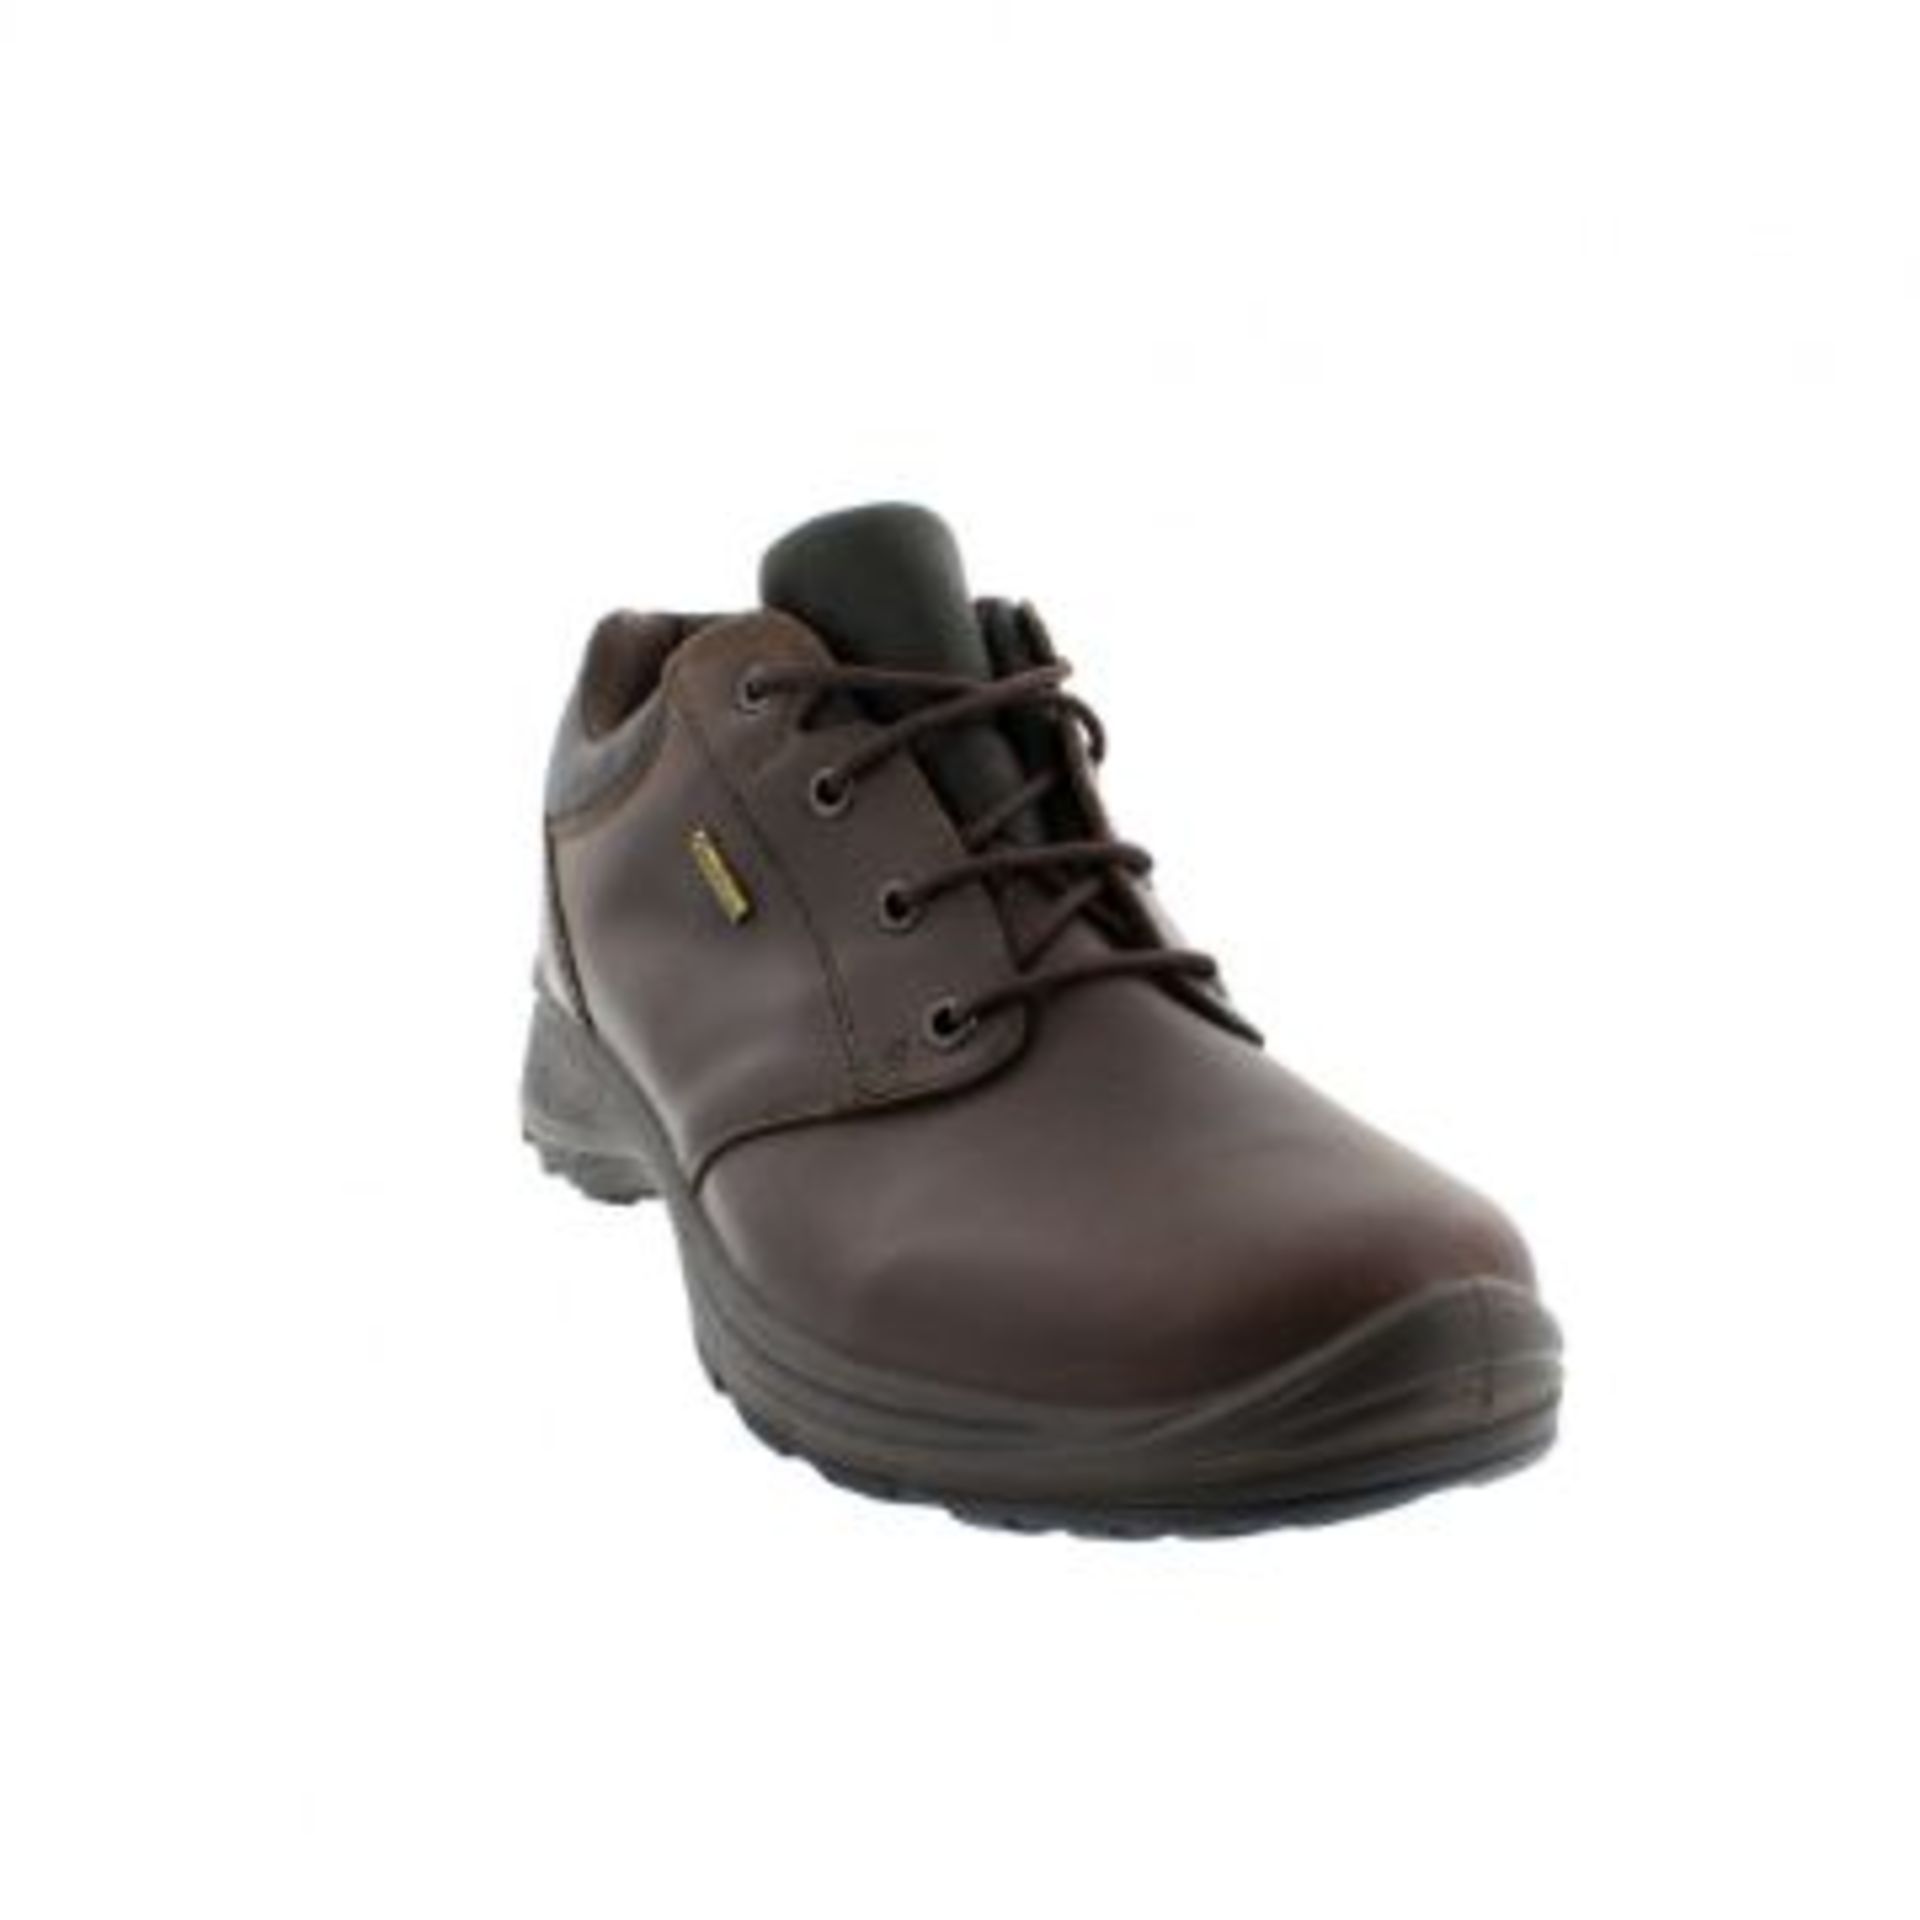 1 x Pair of Men's Grisport Brown Leather GriTex Shoes - Rogerson Footwear - Brand New and Boxed - - Image 4 of 6